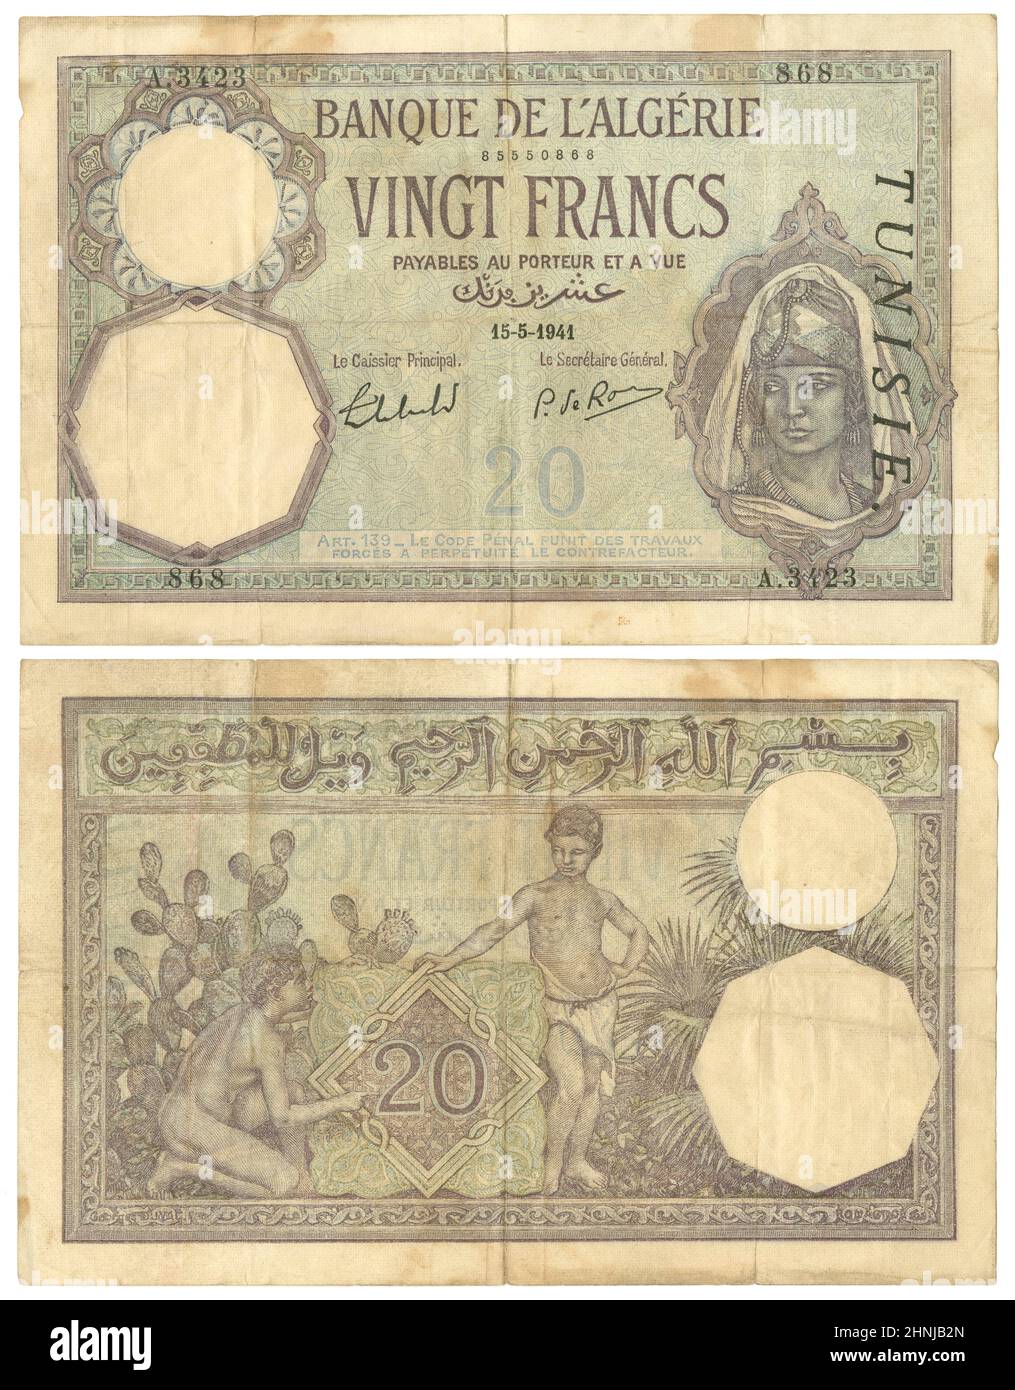 1941, Twenty Francs note, Tunisia, obverse and reverse. Actual size: 164mm x 105mm. Stock Photo